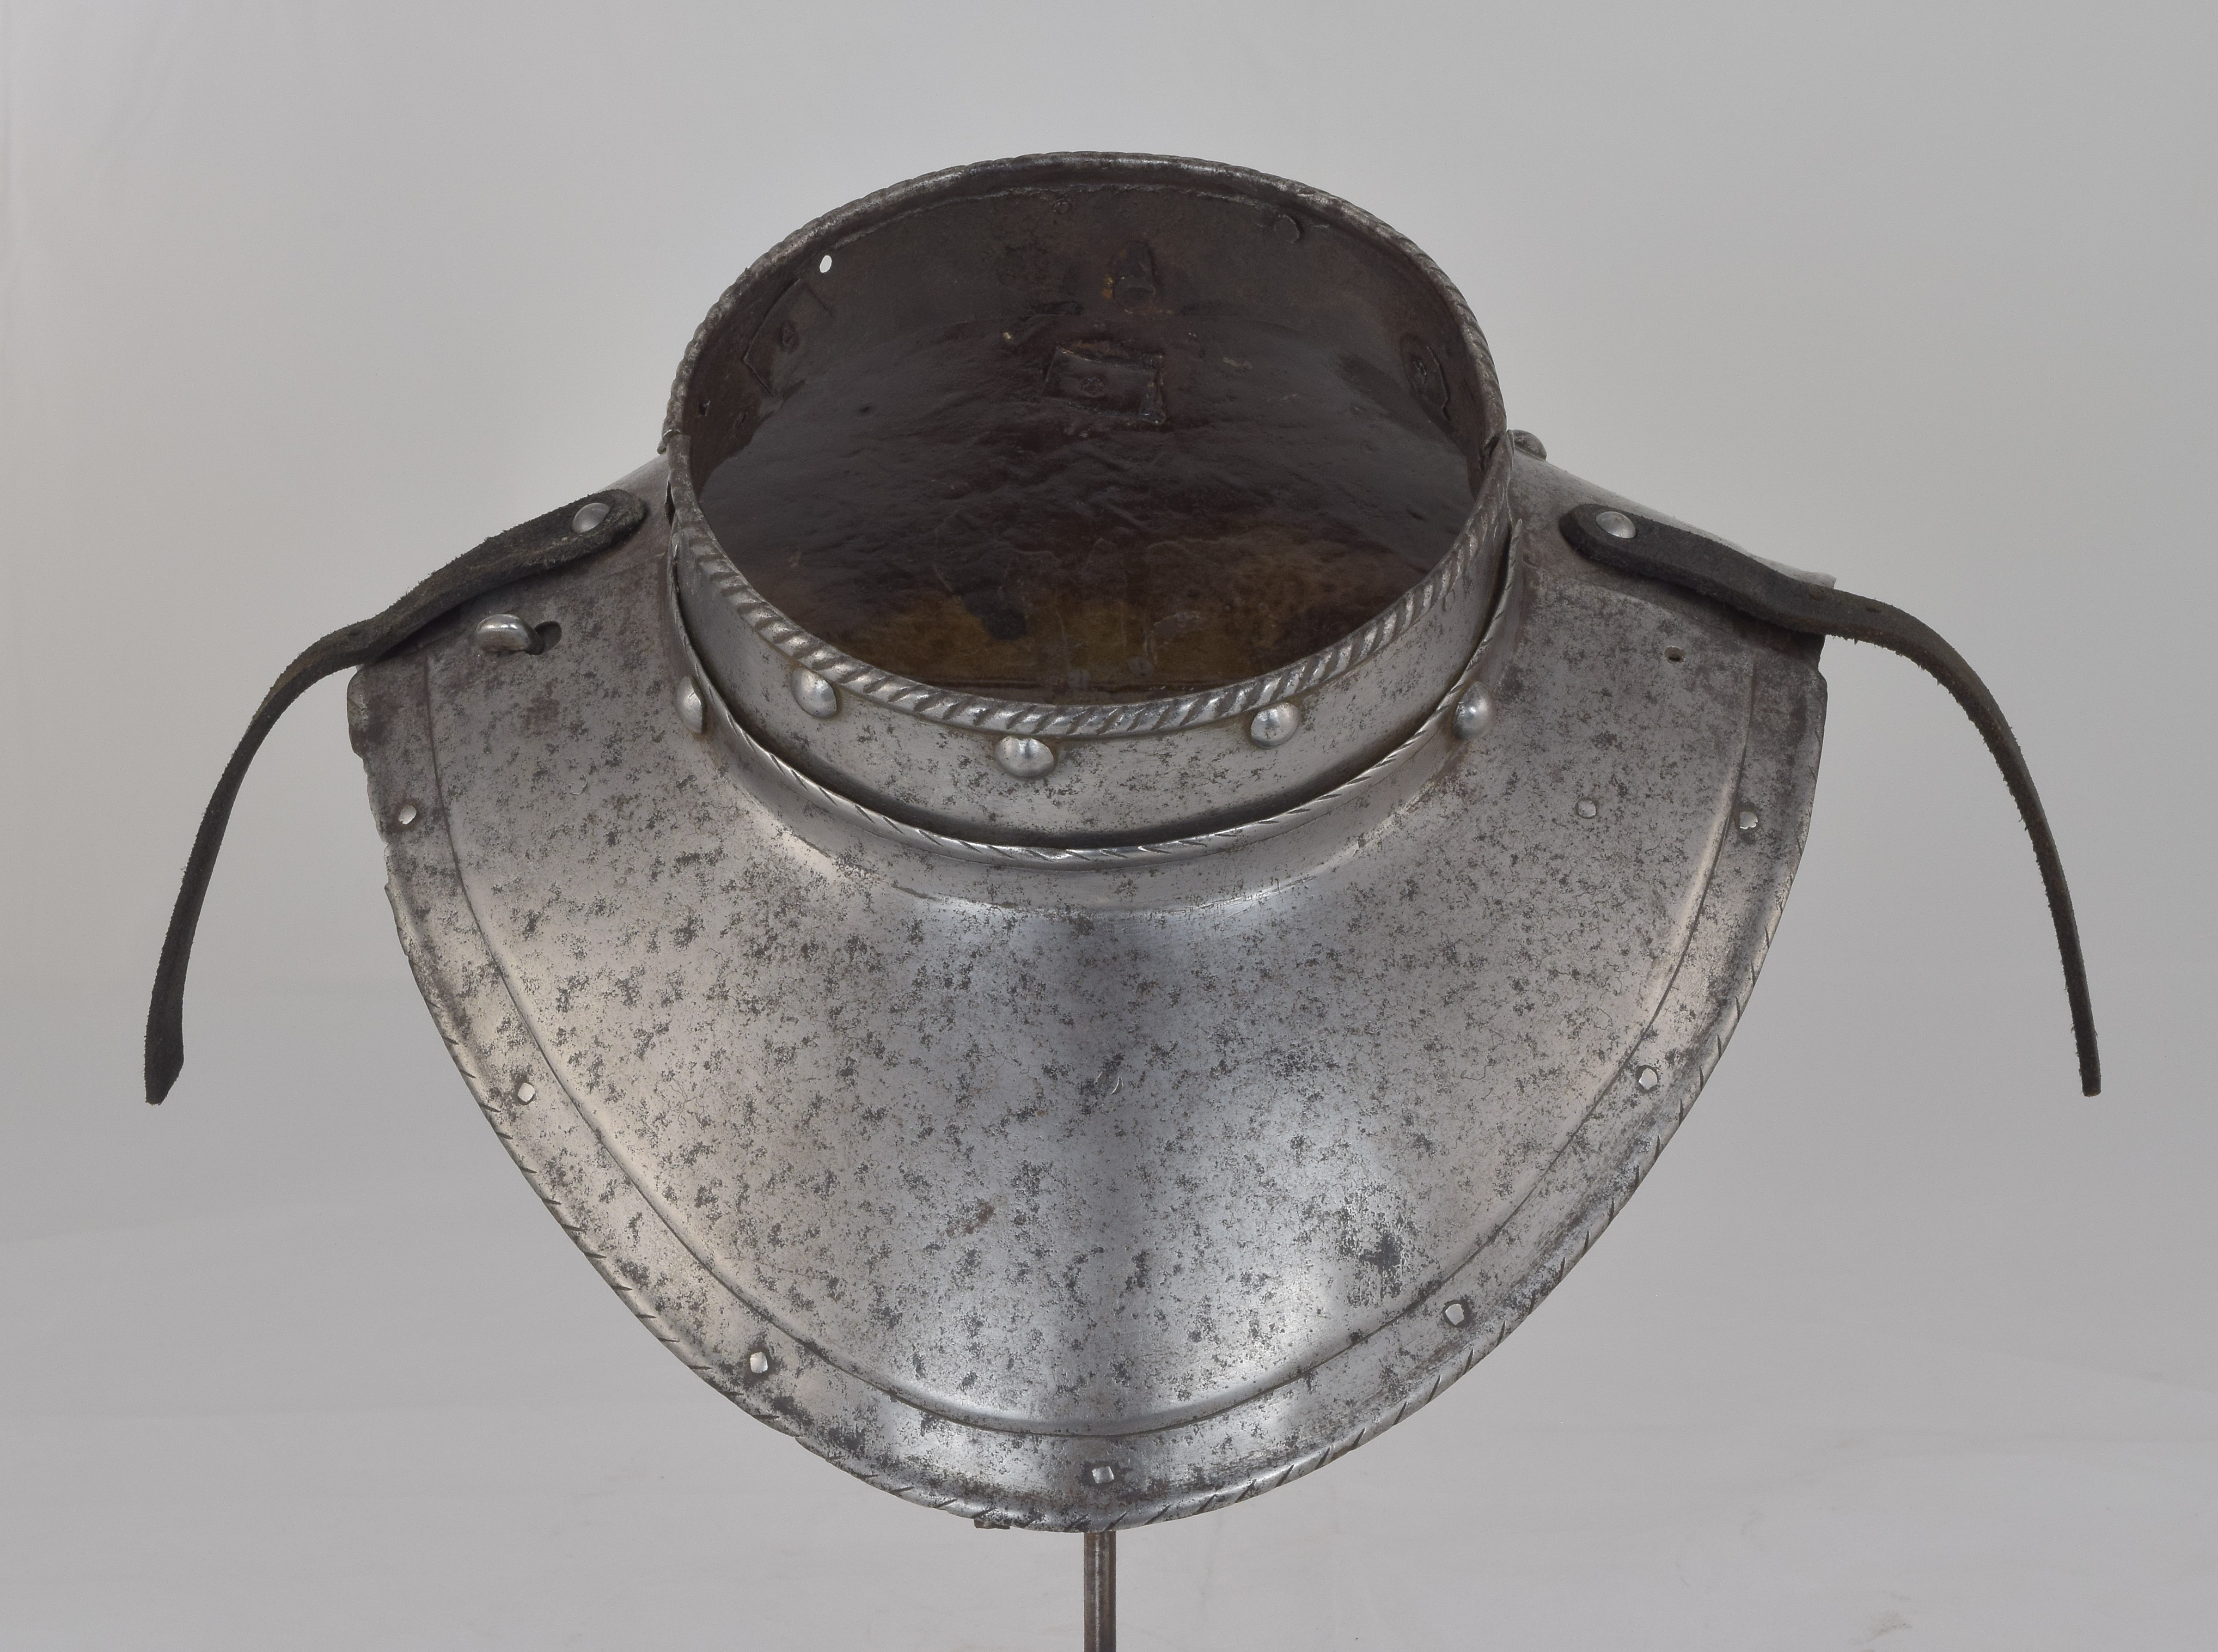 Italian Gorget - A-114c-front